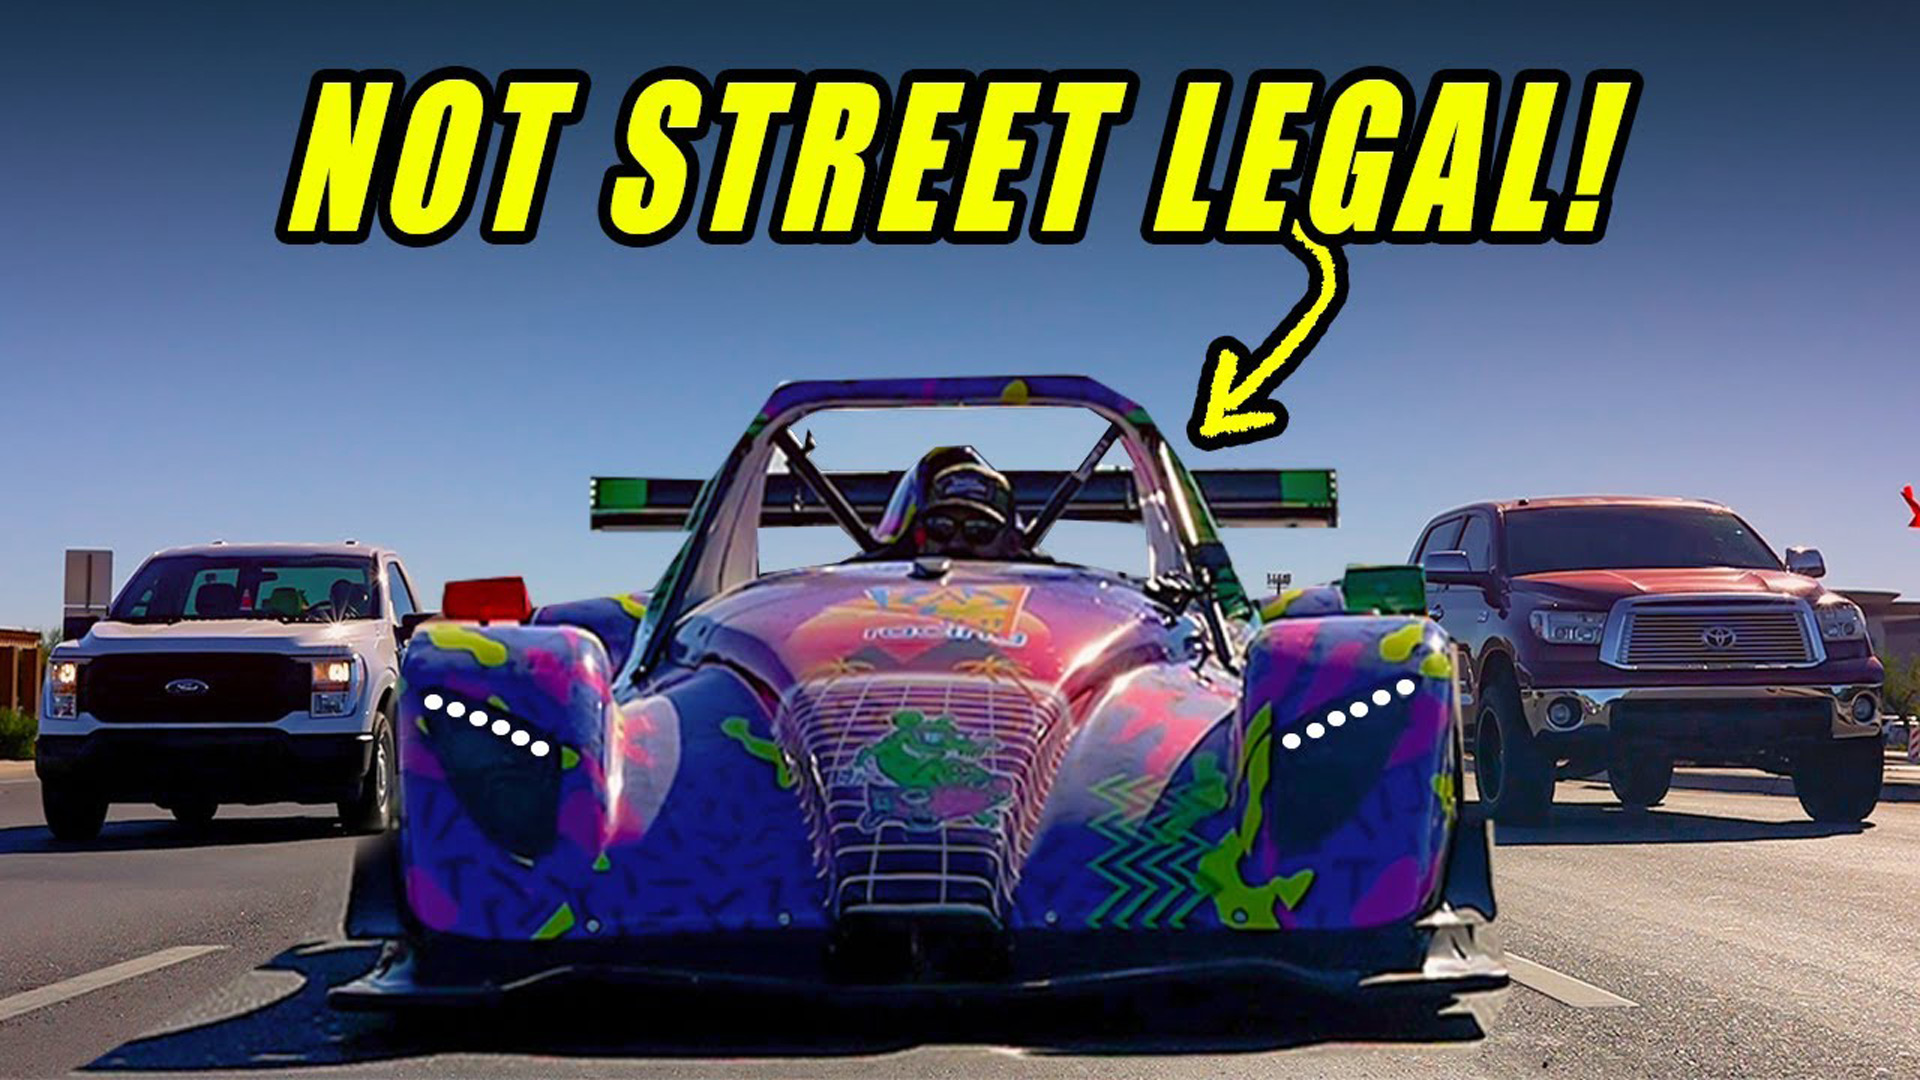 DRIVING AN ILLEGAL RACECAR ON PUBLIC STREETS! | Radical SR3 RSX